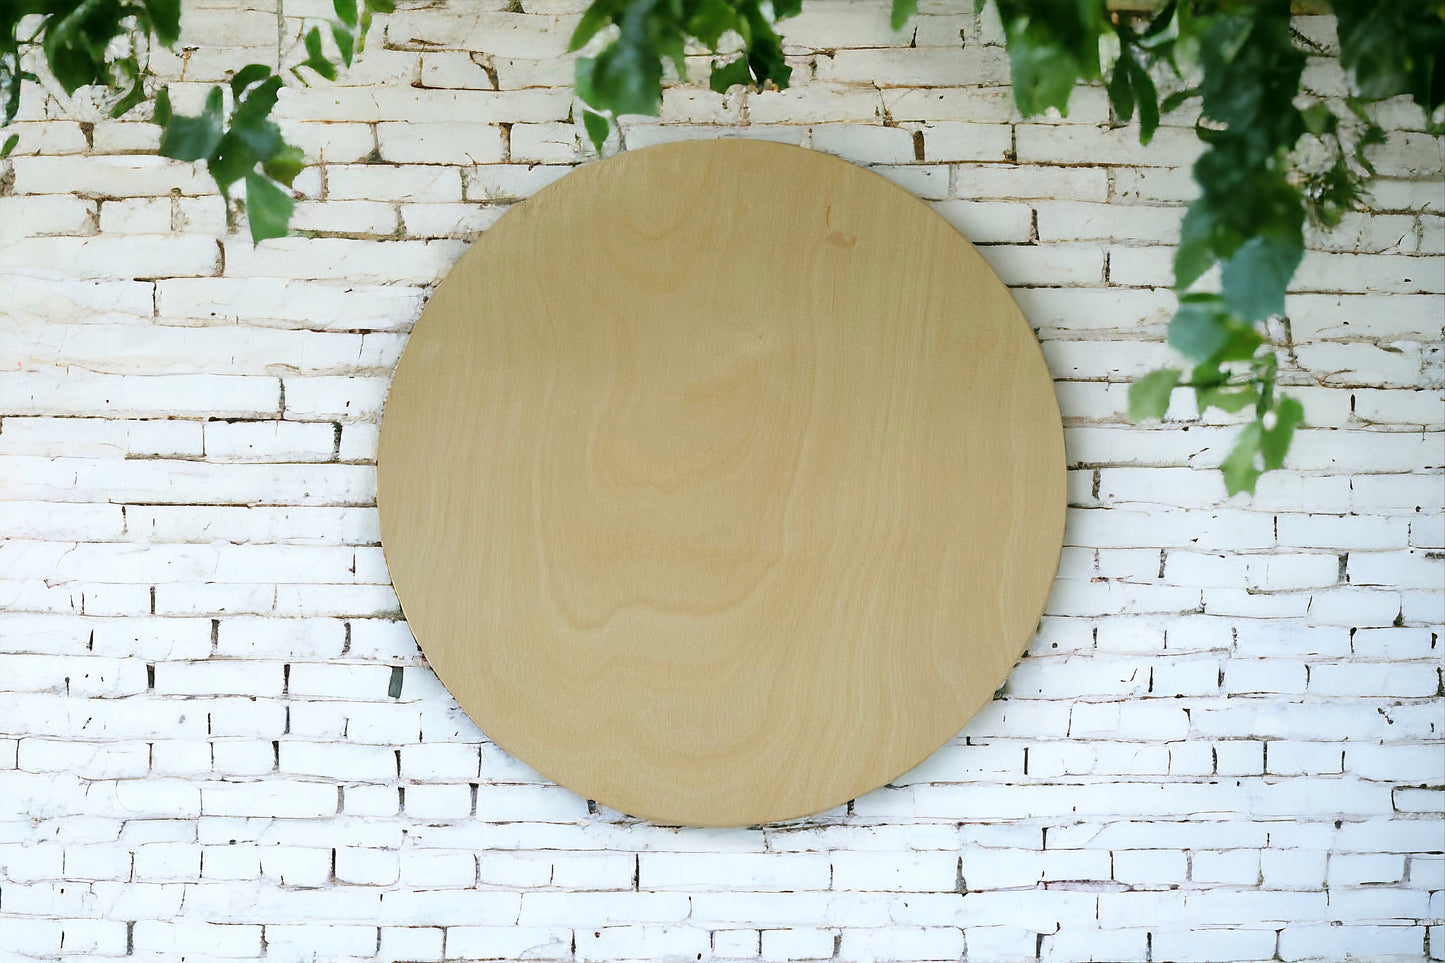 15 inch birch plywood wooden crafting round cutout for art and decorating projects